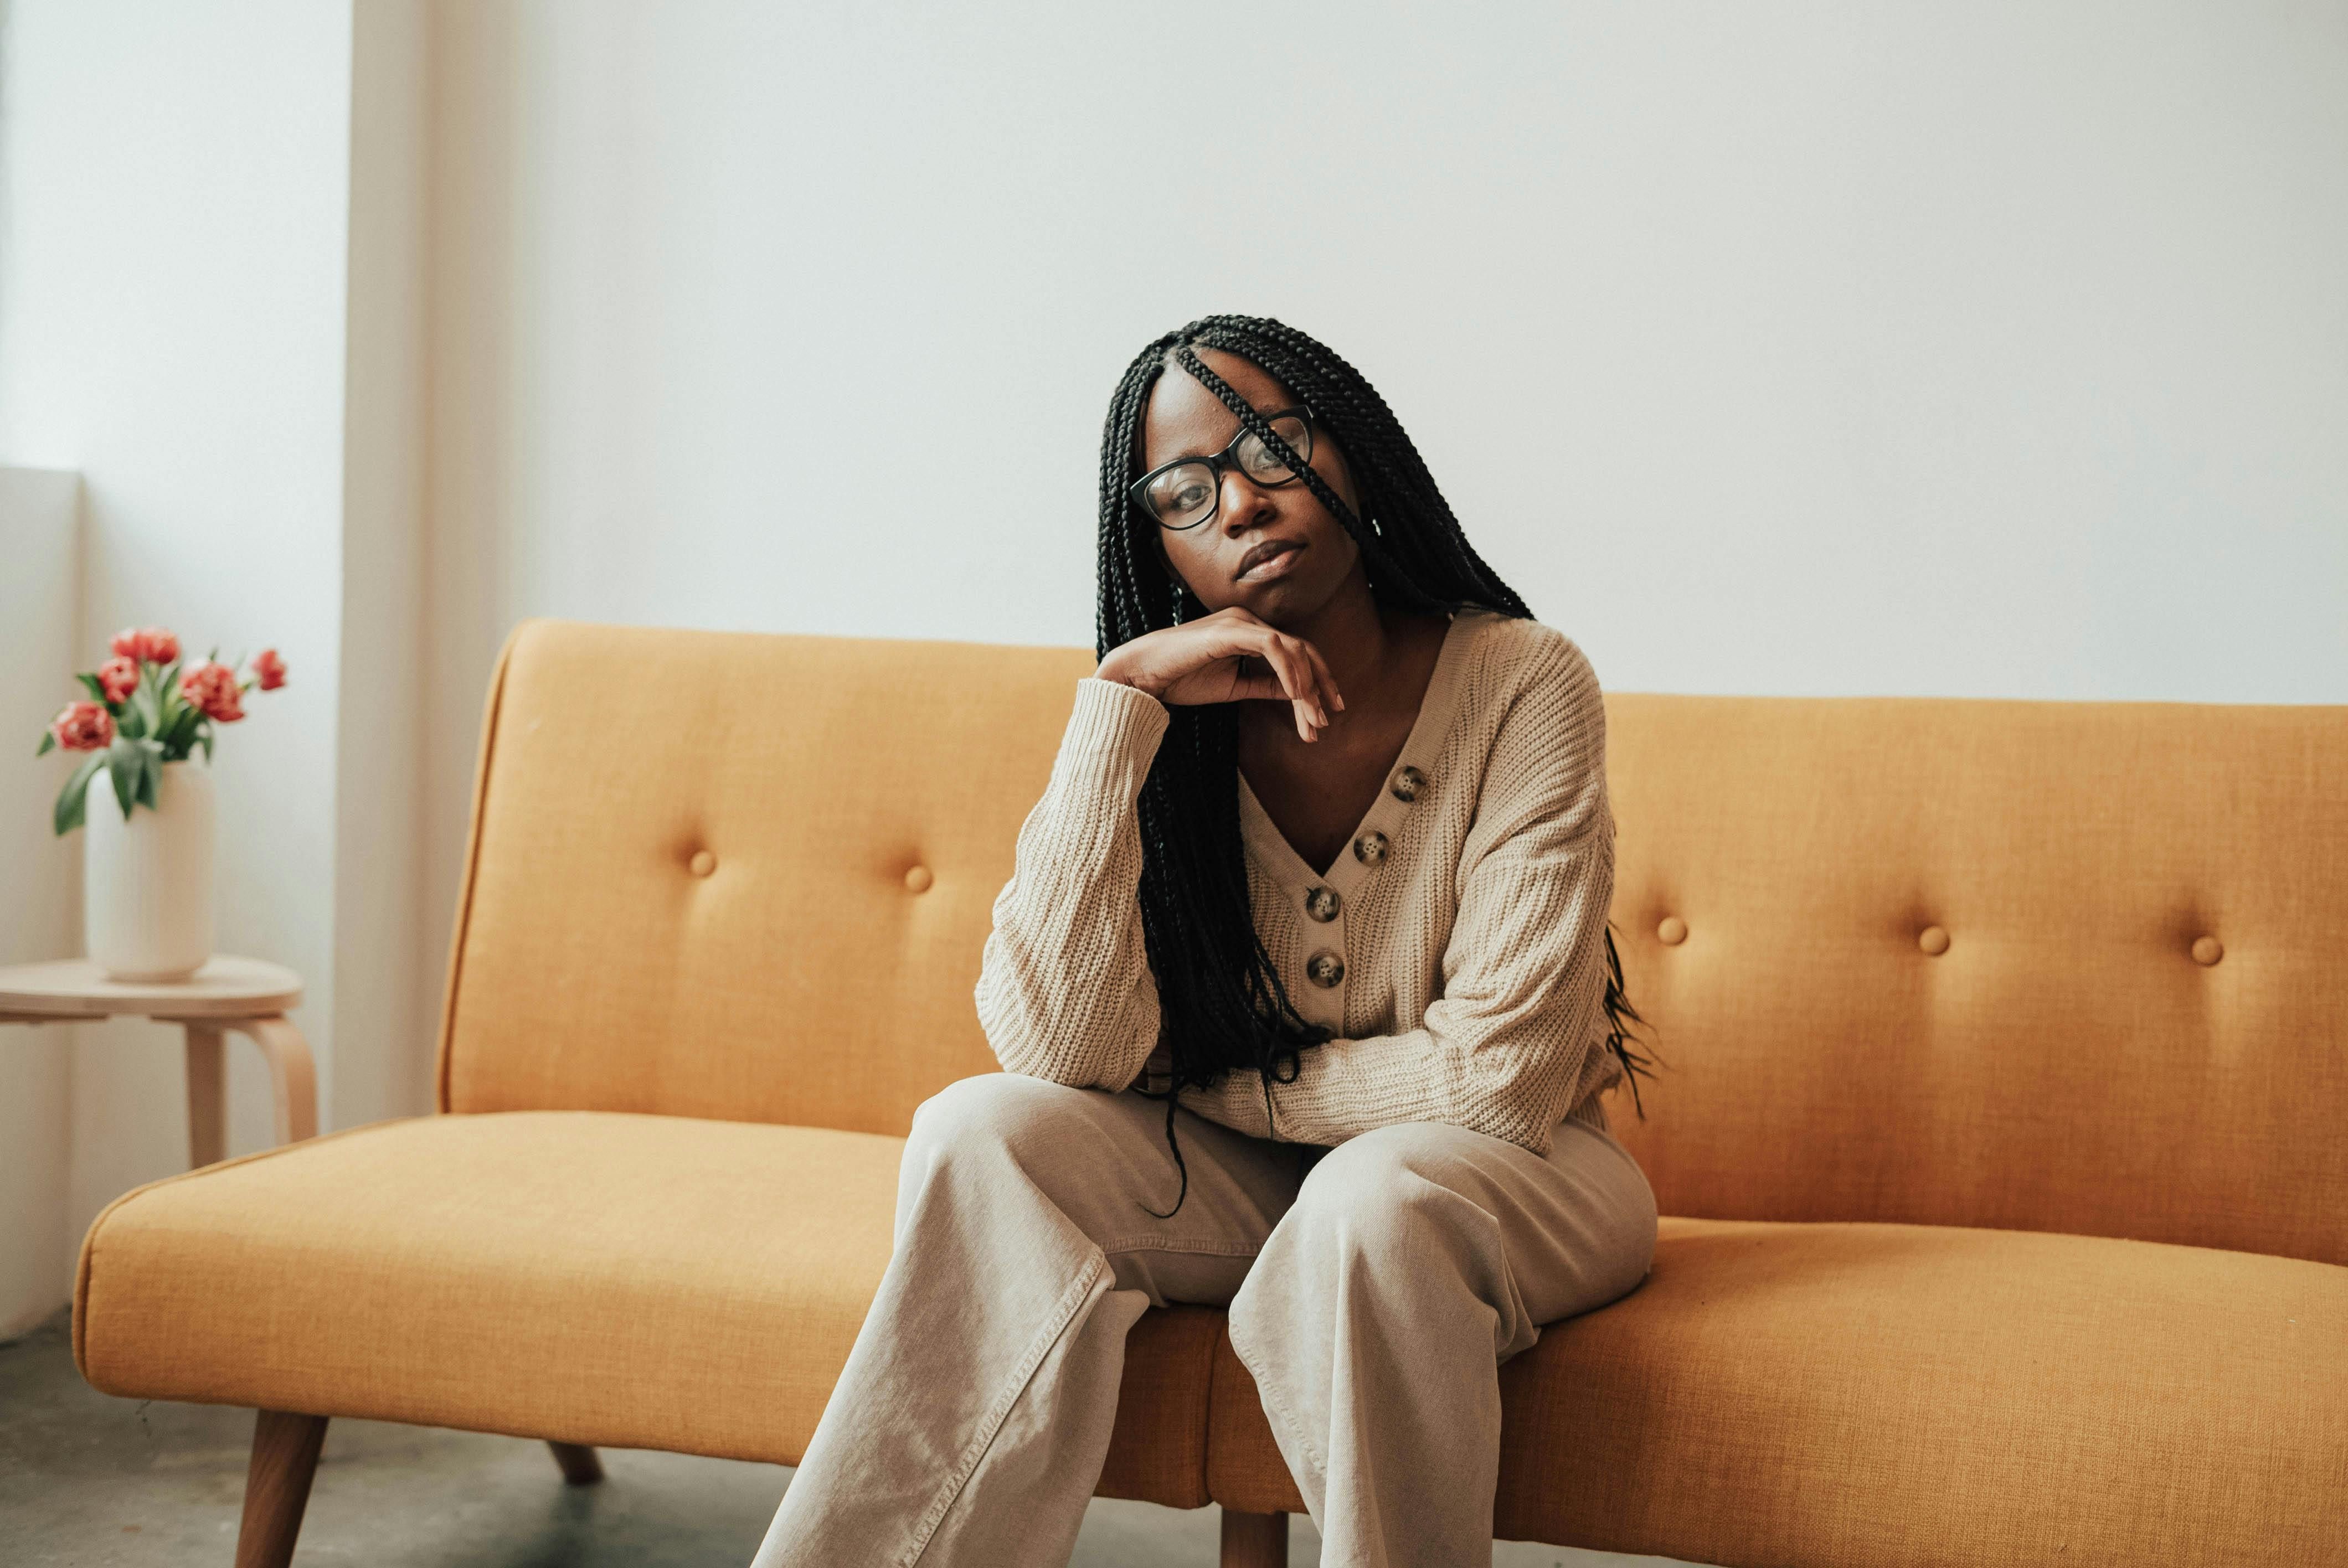 A Black female therapist with box braids sits on a midcentury sofa upholstered in tangerine linen.